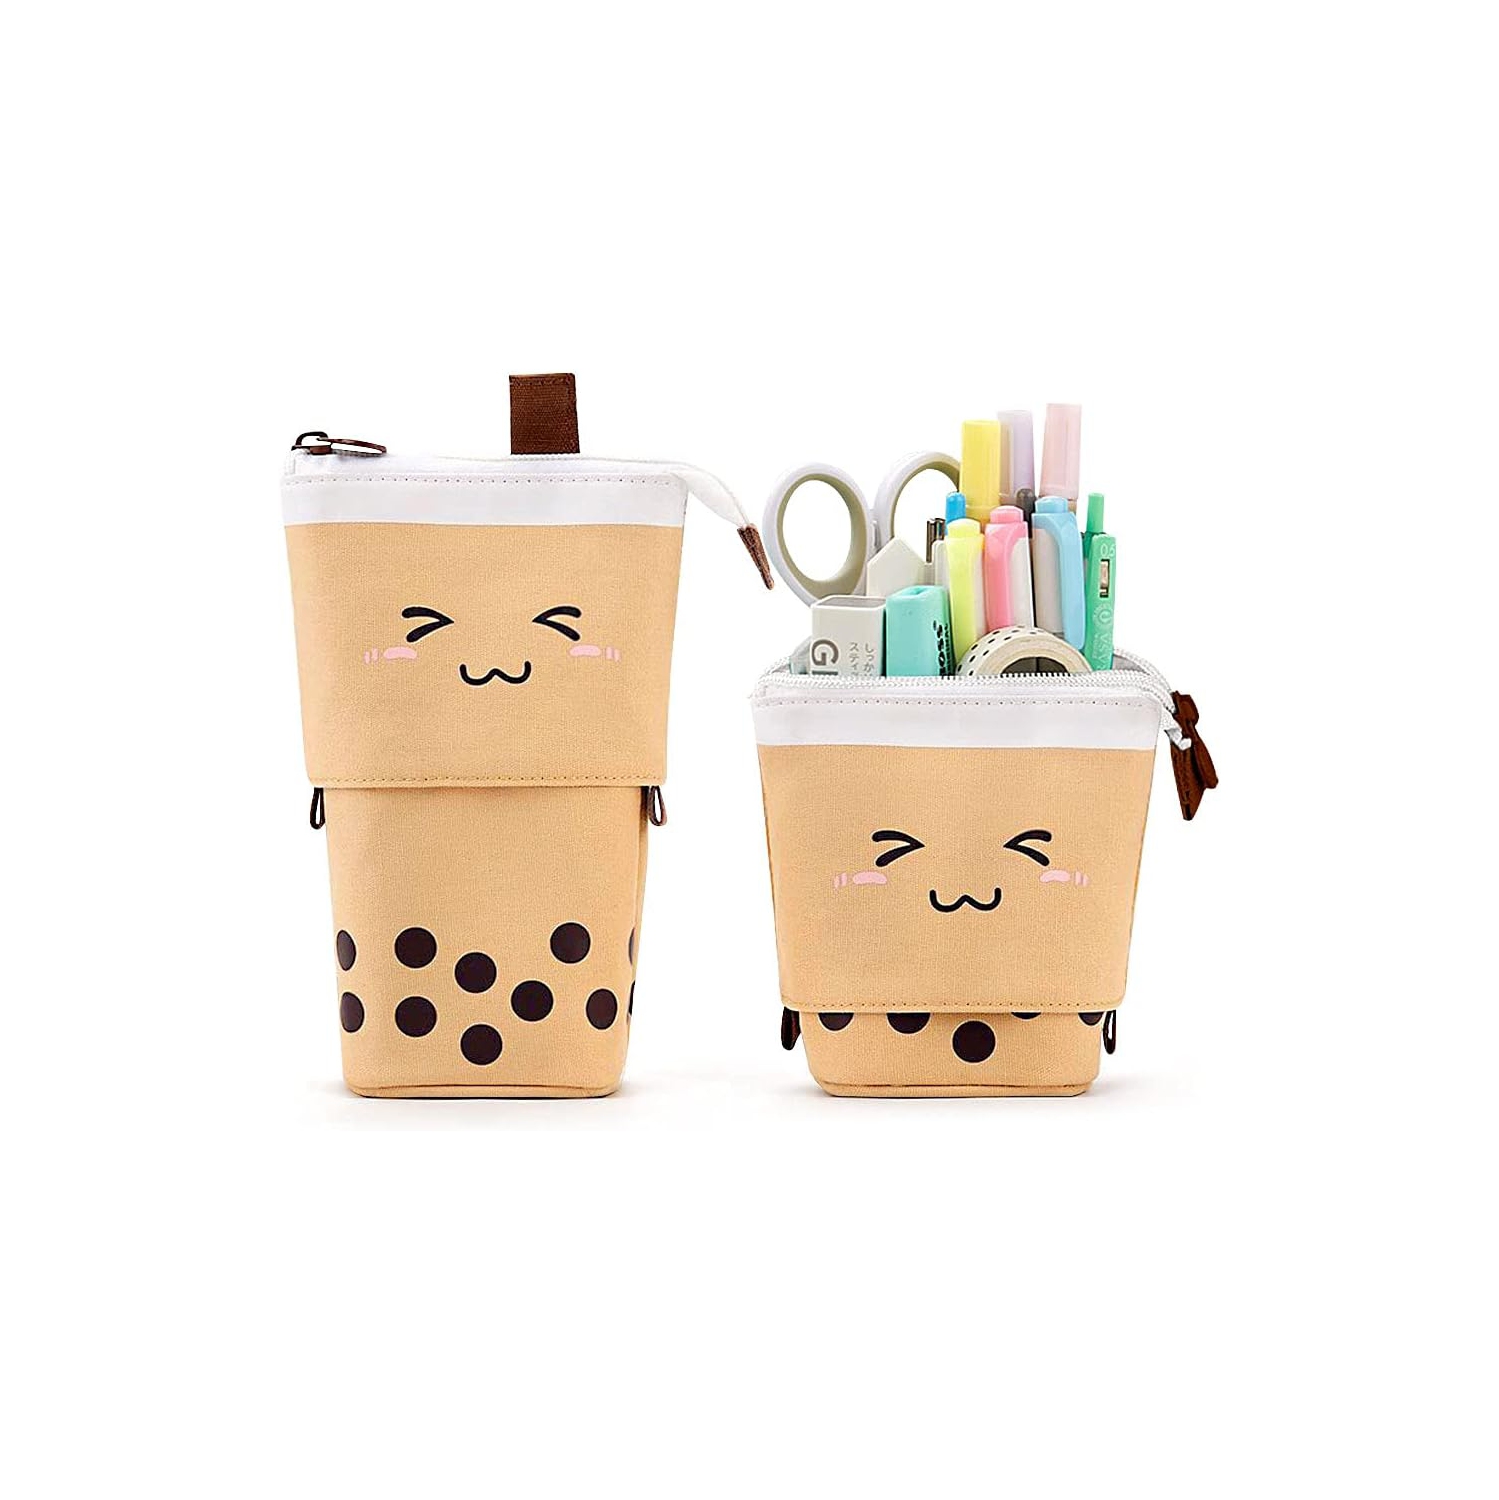 Boba Cute Standing Pencil Case for Kids, Pop Up Pencil Box Makeup Pouch, Stand UP Christmas Gift kids Pen Holder